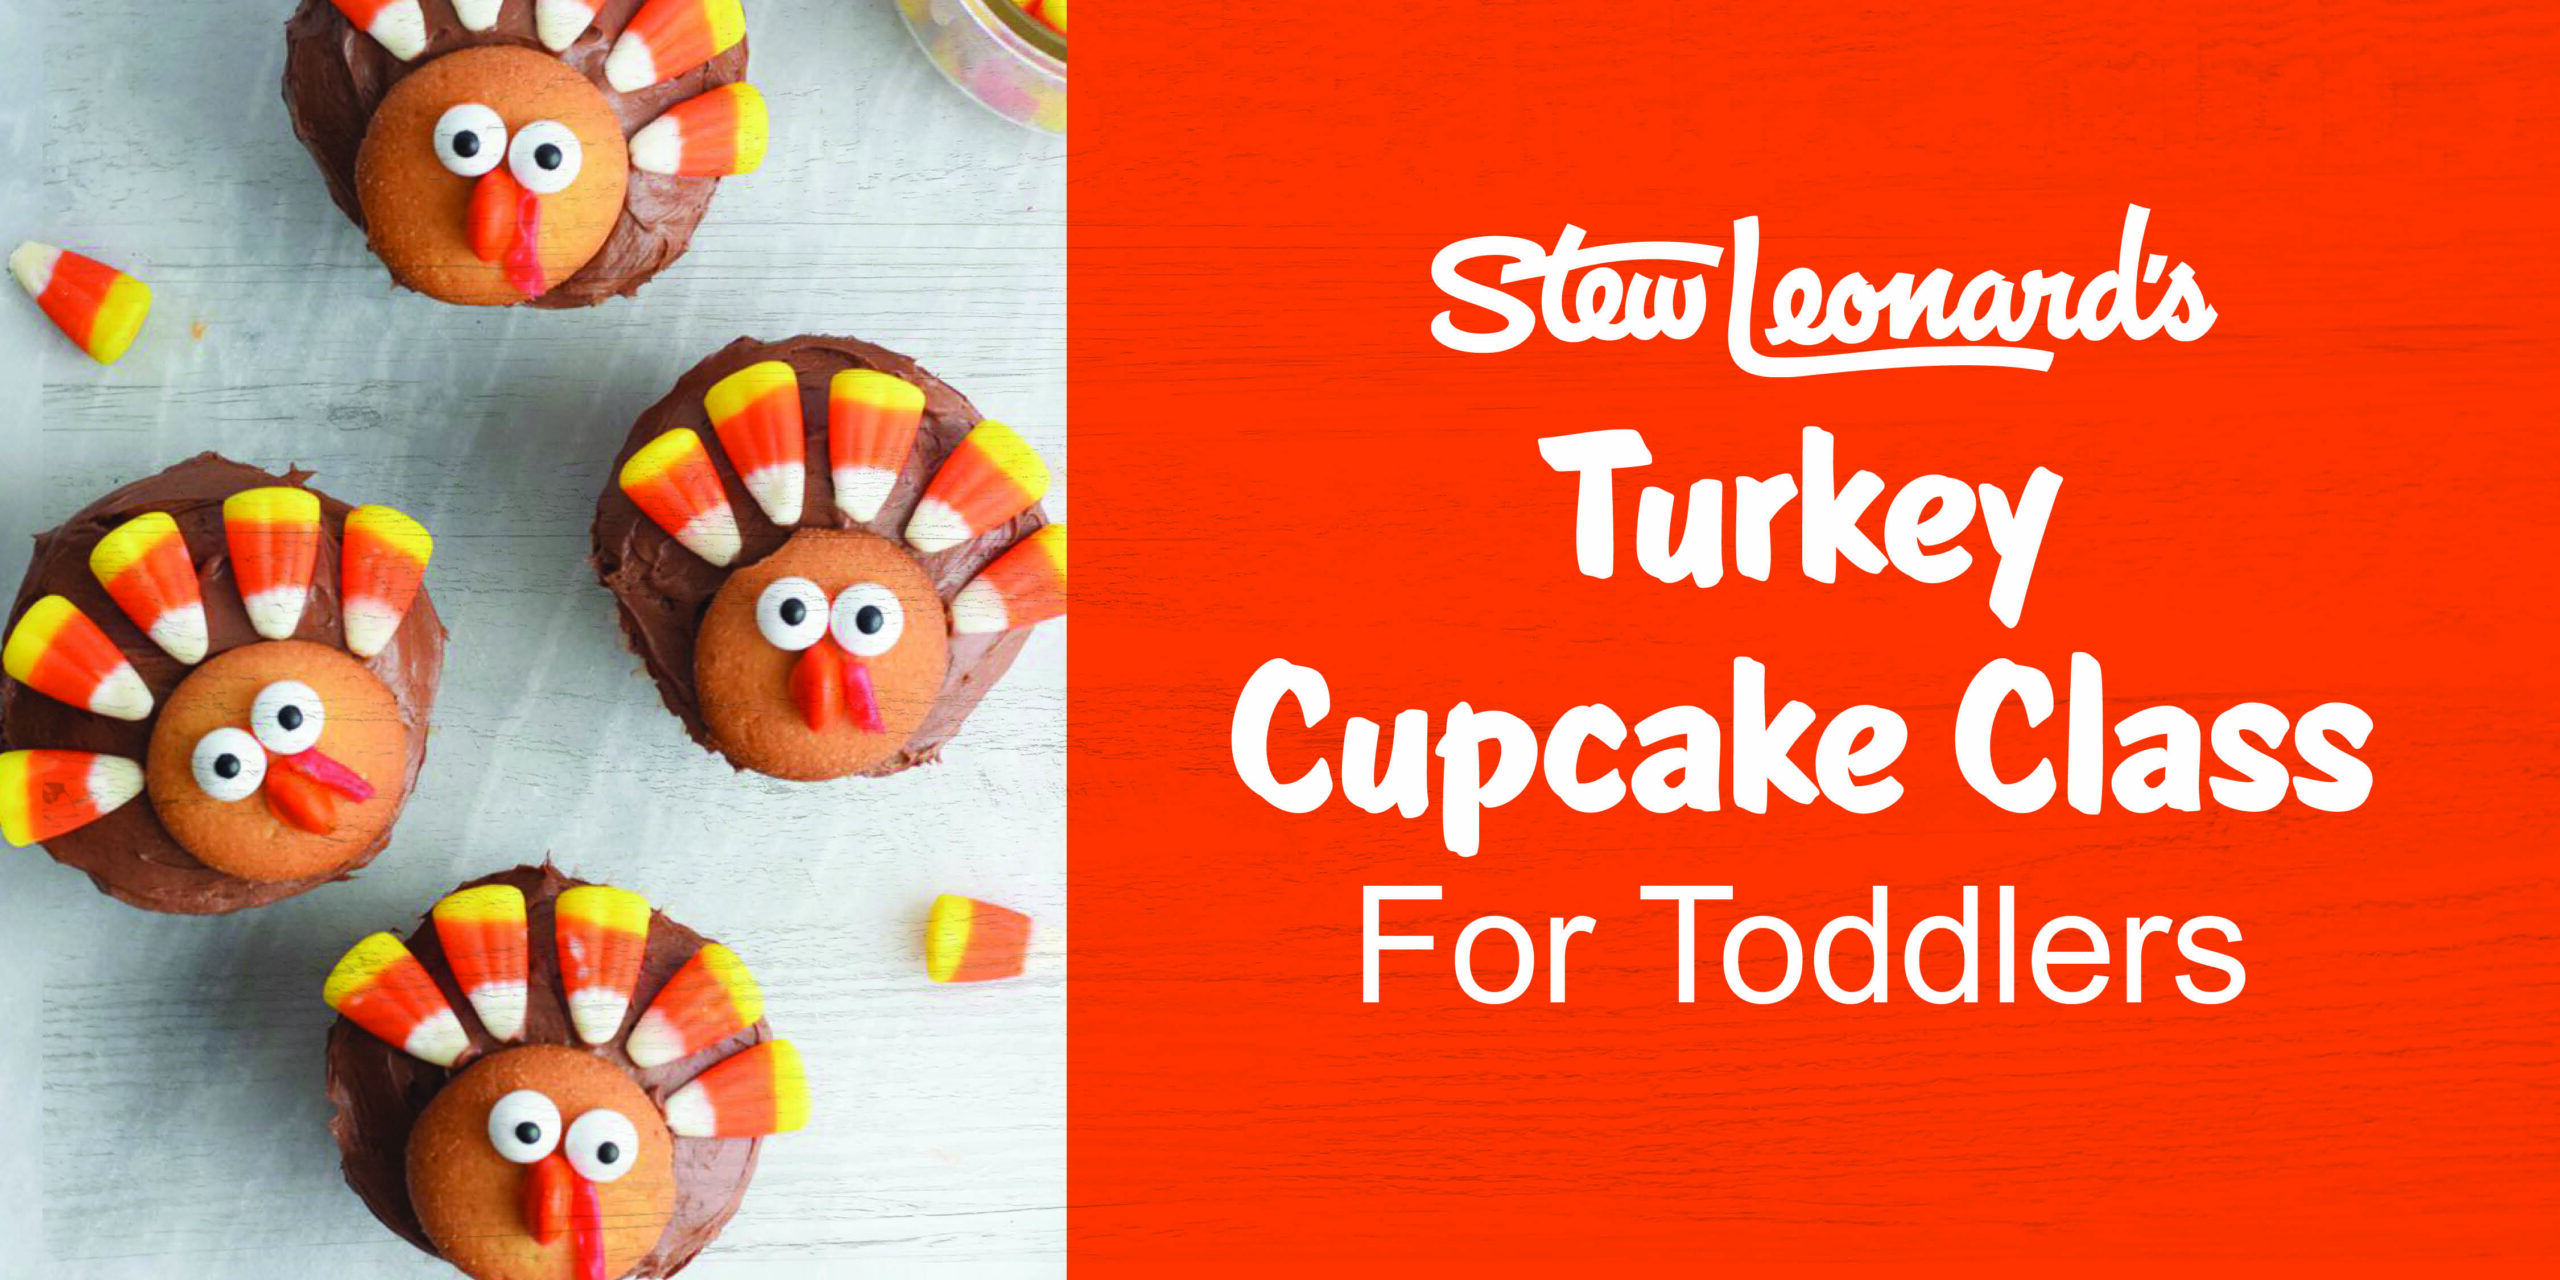 urkey-Themed Cupcakes Class for Toddlers